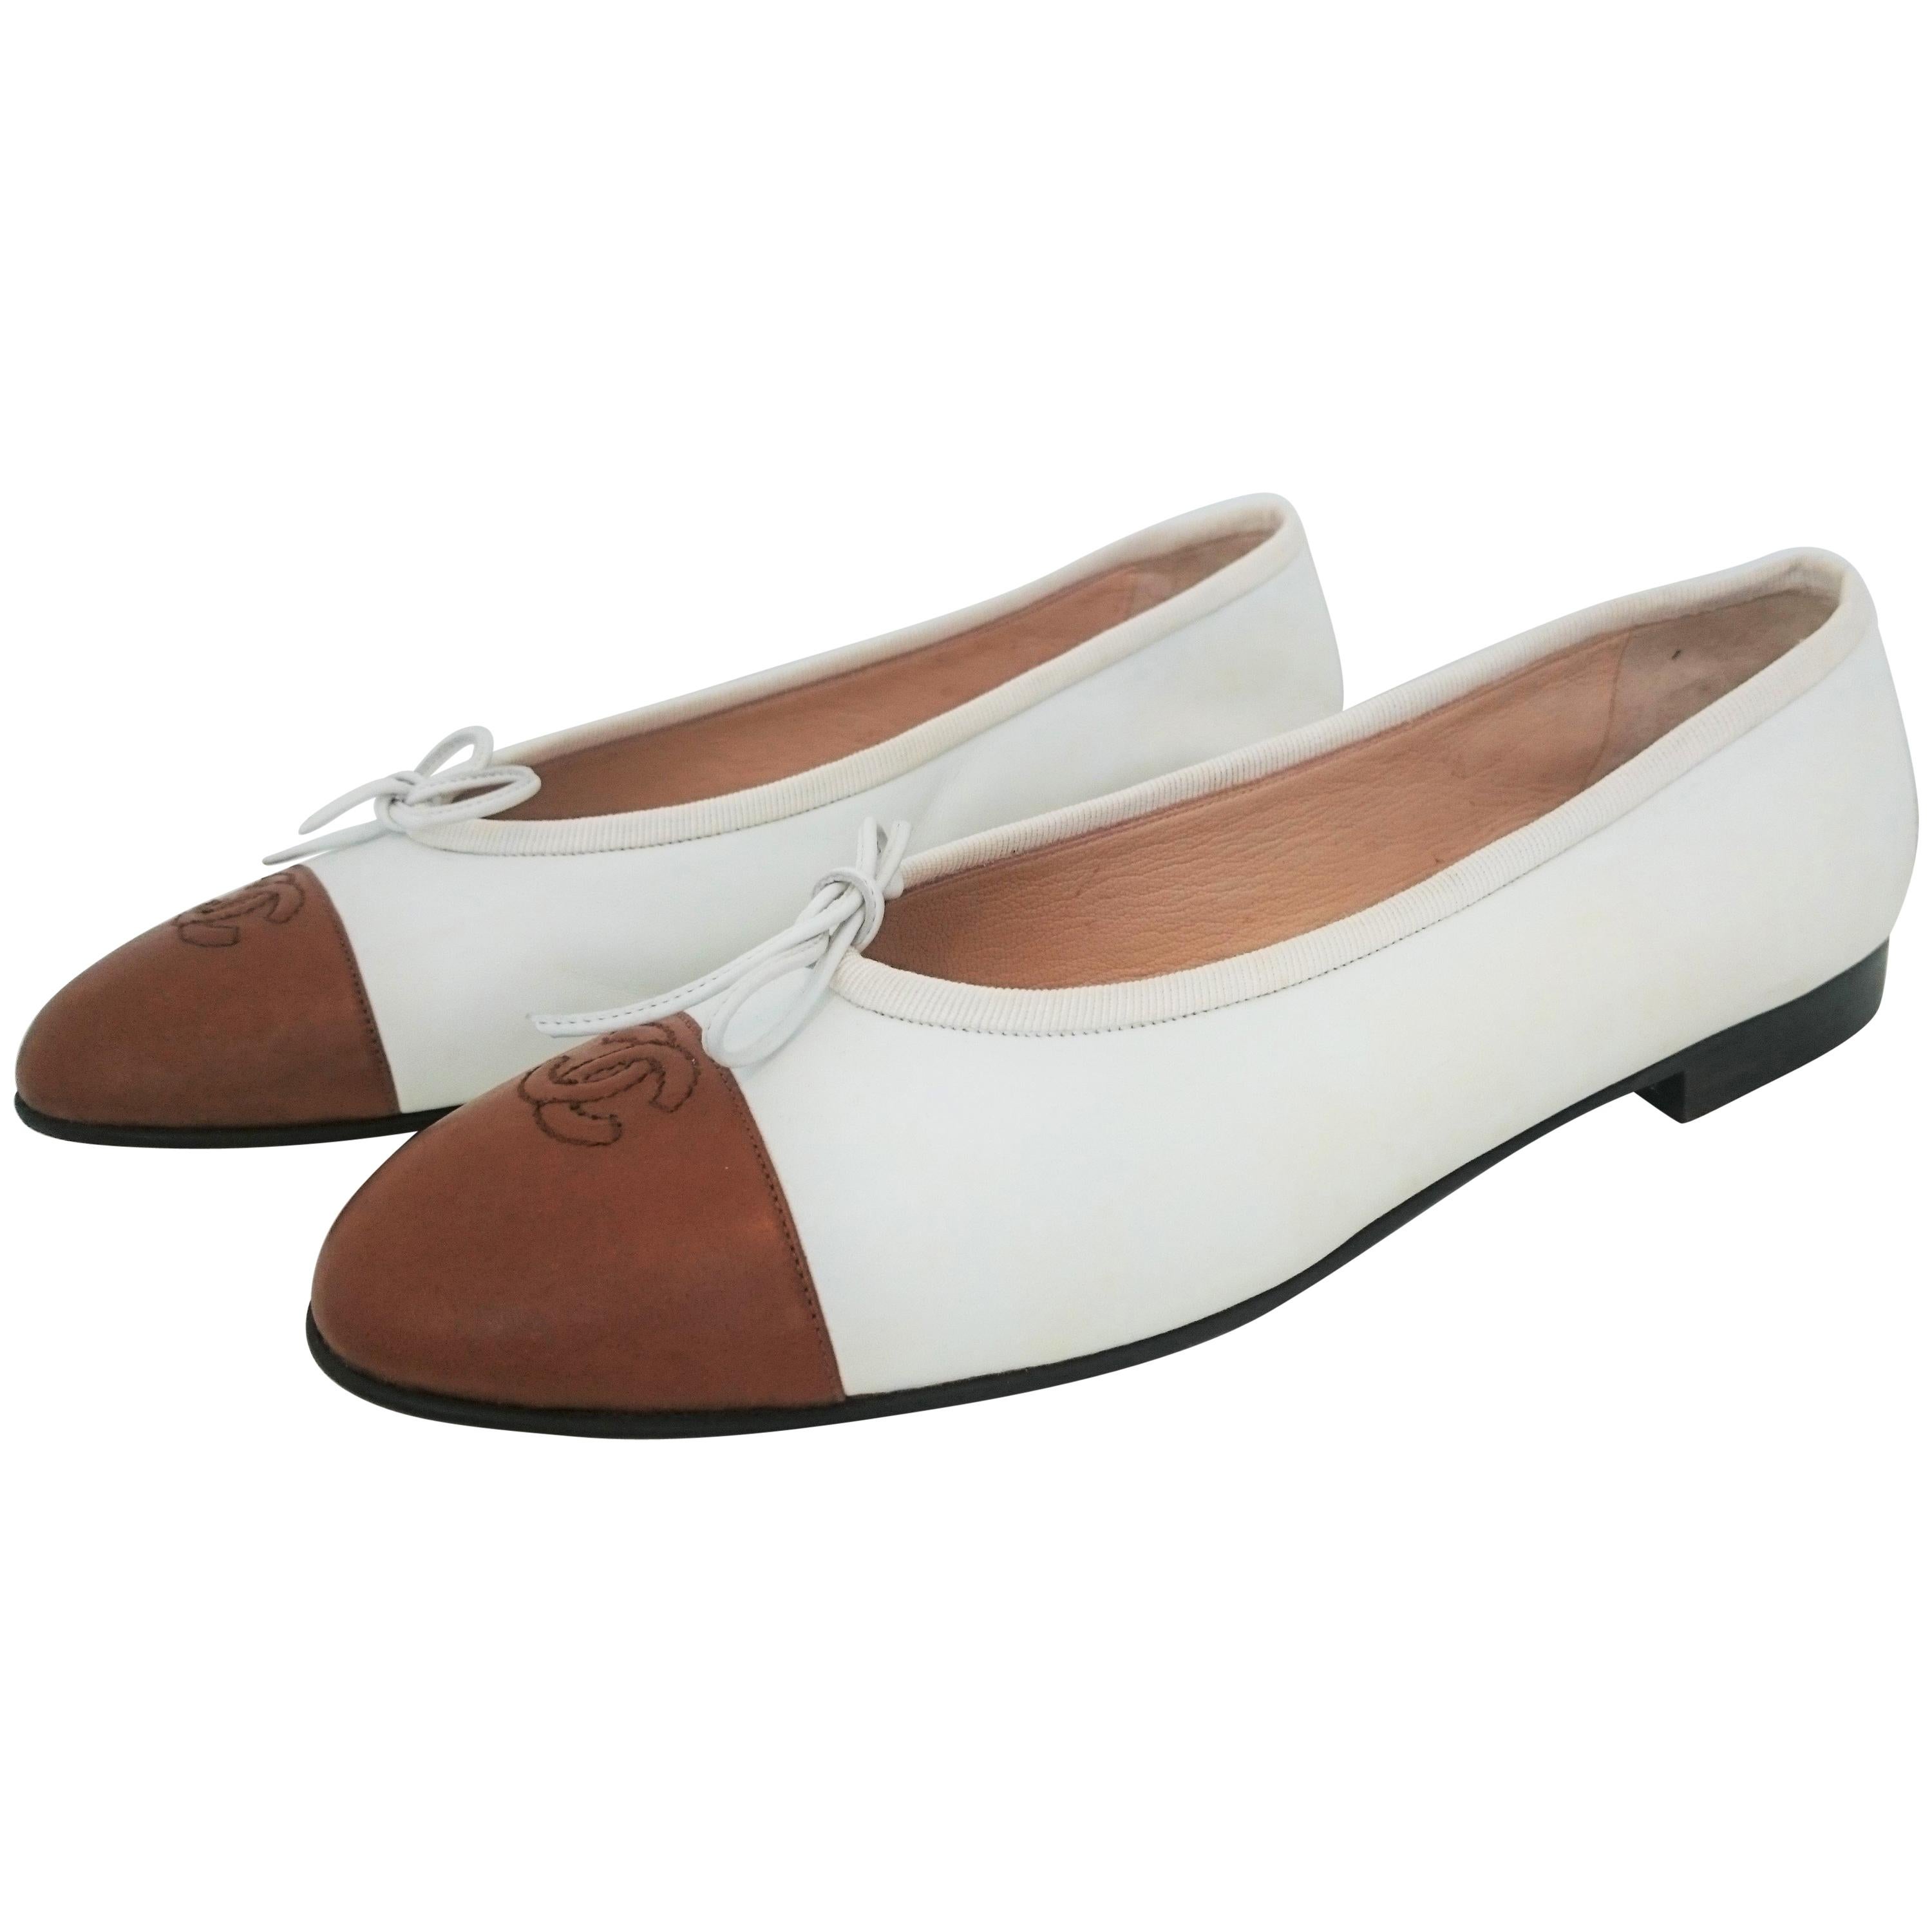 Chanel Ballerina Ballet Flats - Bicolor White and Caramel - NEW, size 40 1/2